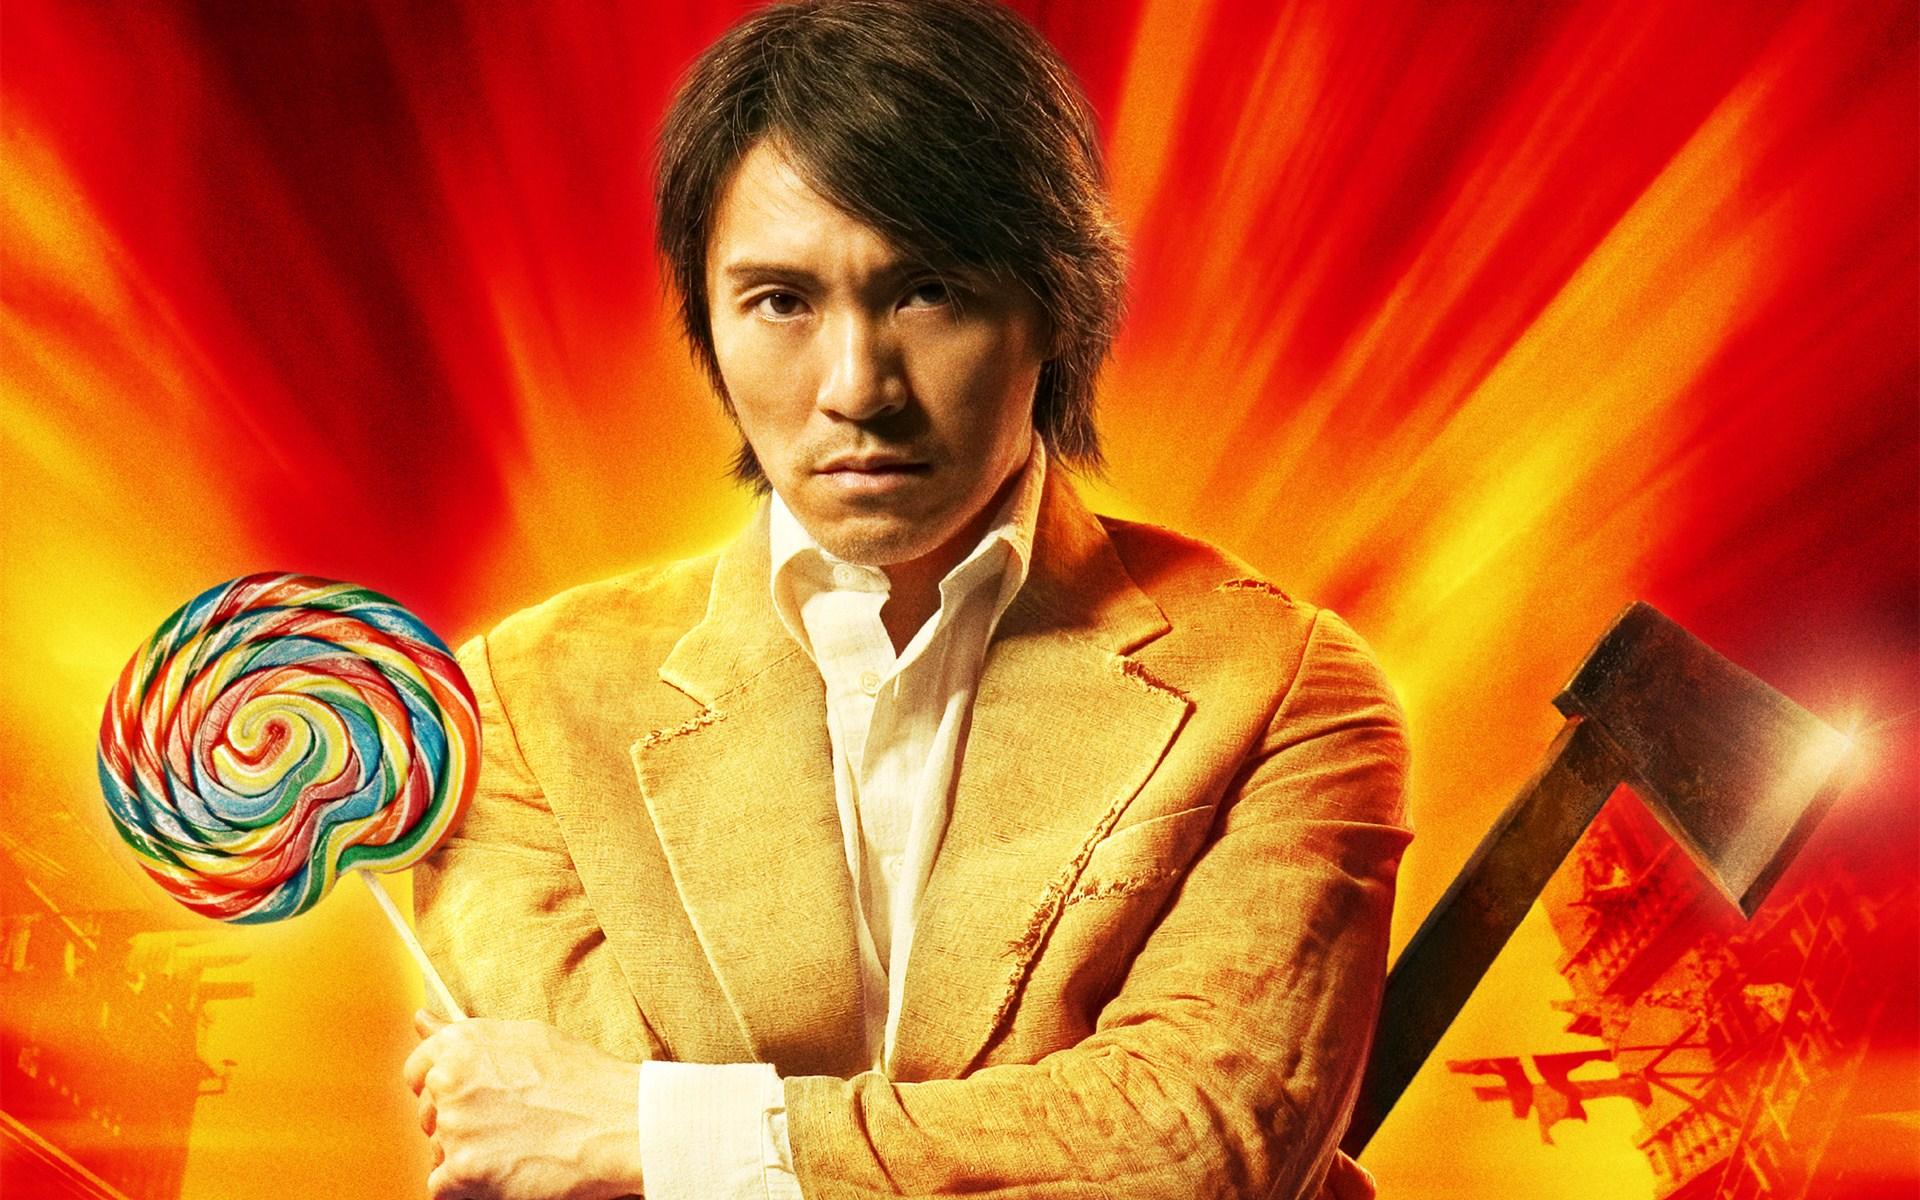 Stephen Chow in Kung Fu Hustle